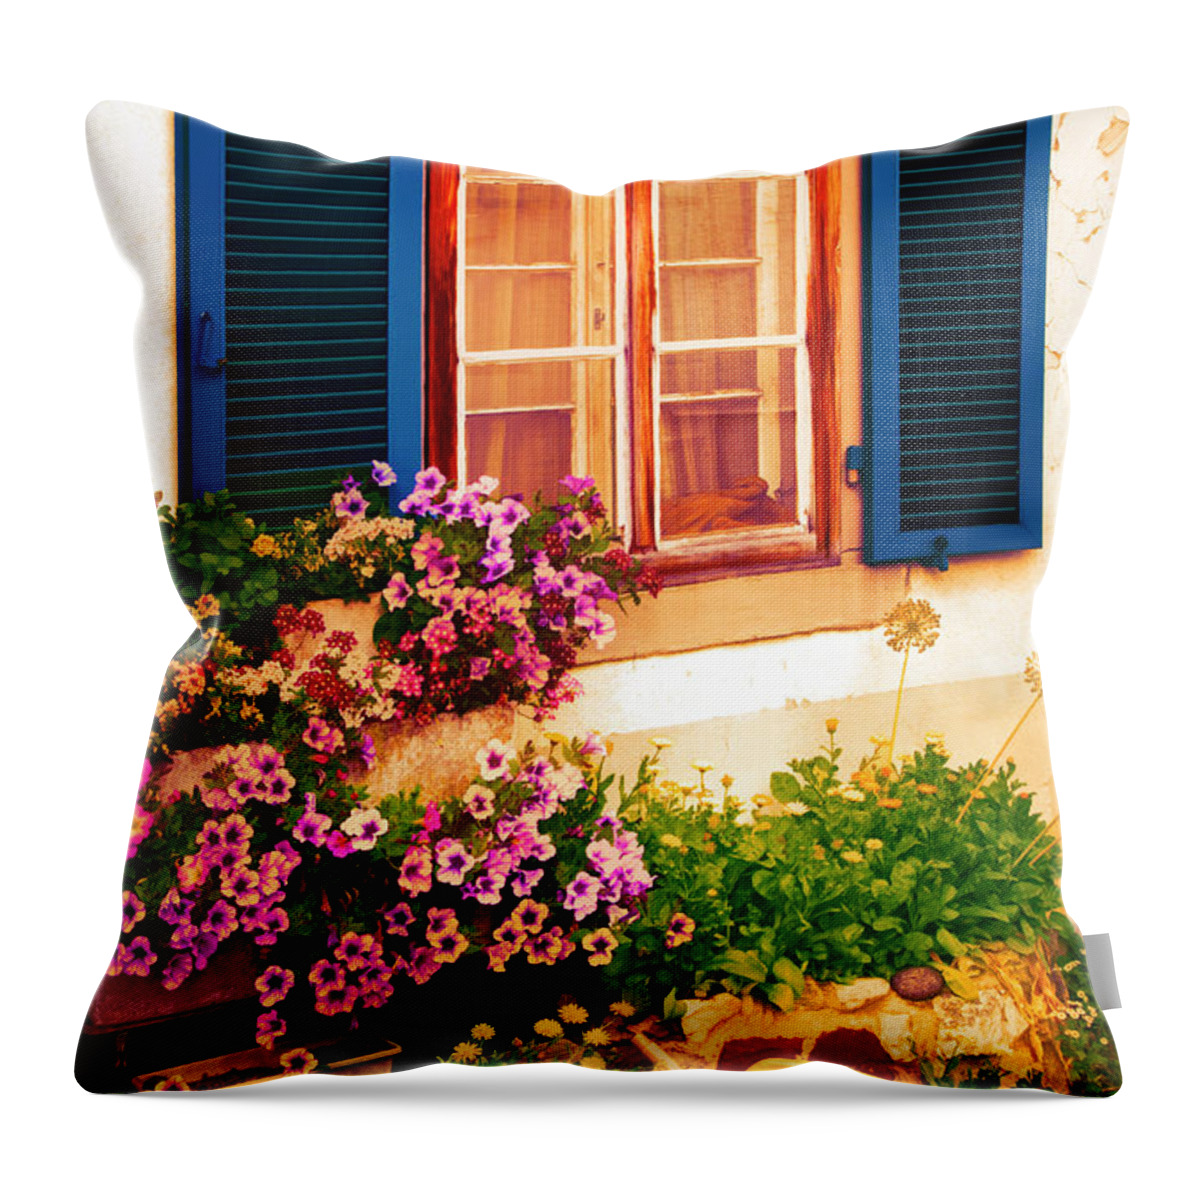 Austria Throw Pillow featuring the photograph Bright Blue Shutters in the Garden by Debra and Dave Vanderlaan